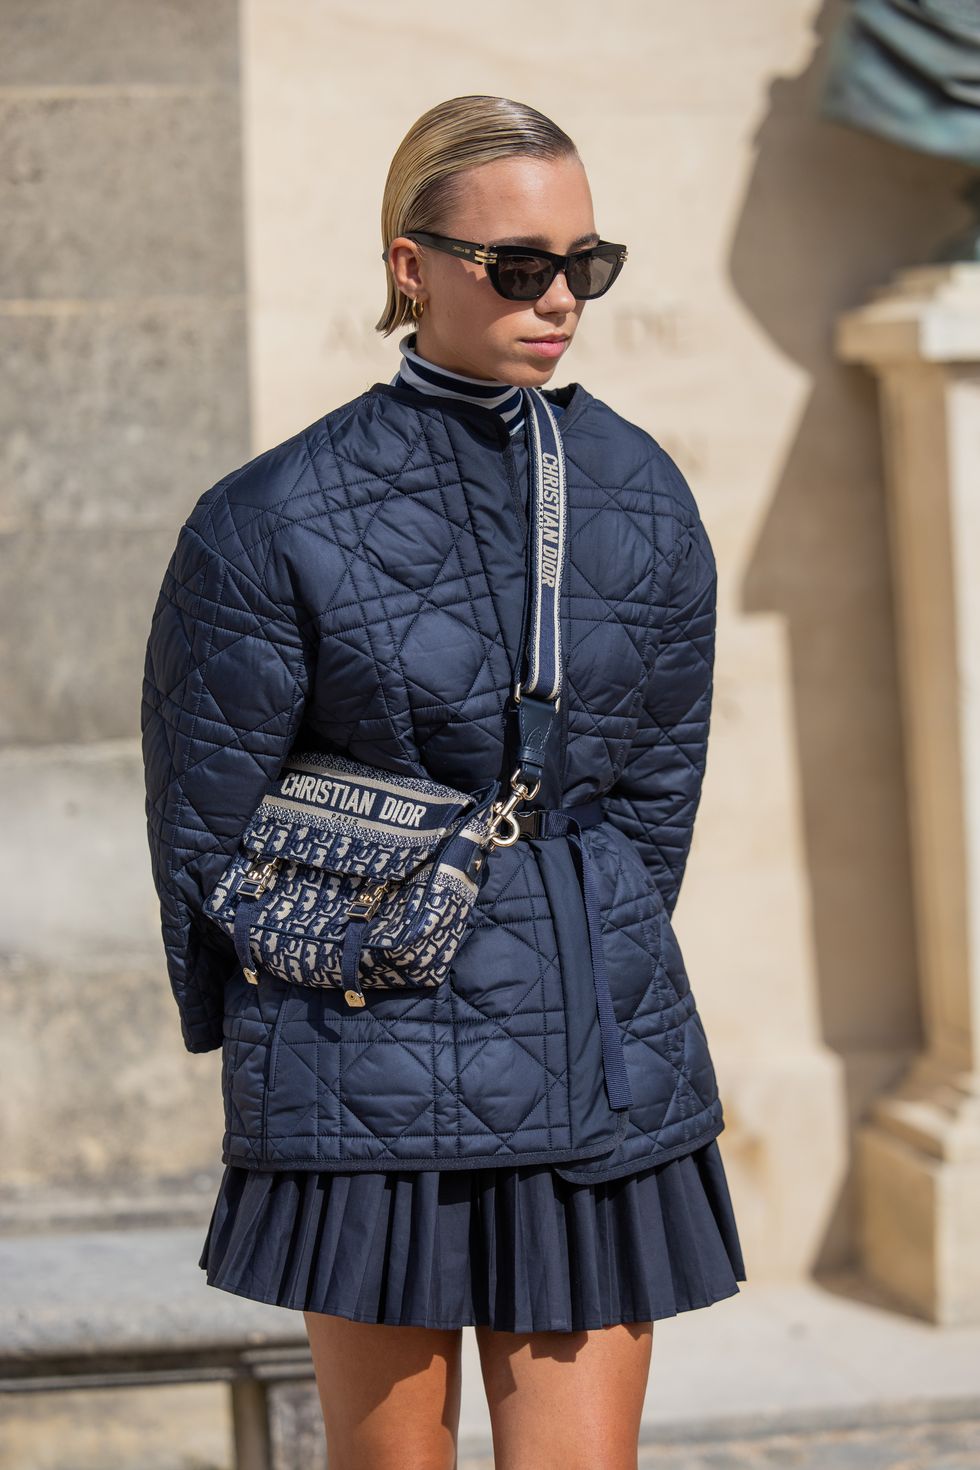 paris, france september 26 lena mantler wears navy puffer jacket, bag, pleated skirt, sunglasses outside dior during the womenswear springsummer 2024 as part of paris fashion week on september 26, 2023 in paris, france photo by christian vieriggetty images